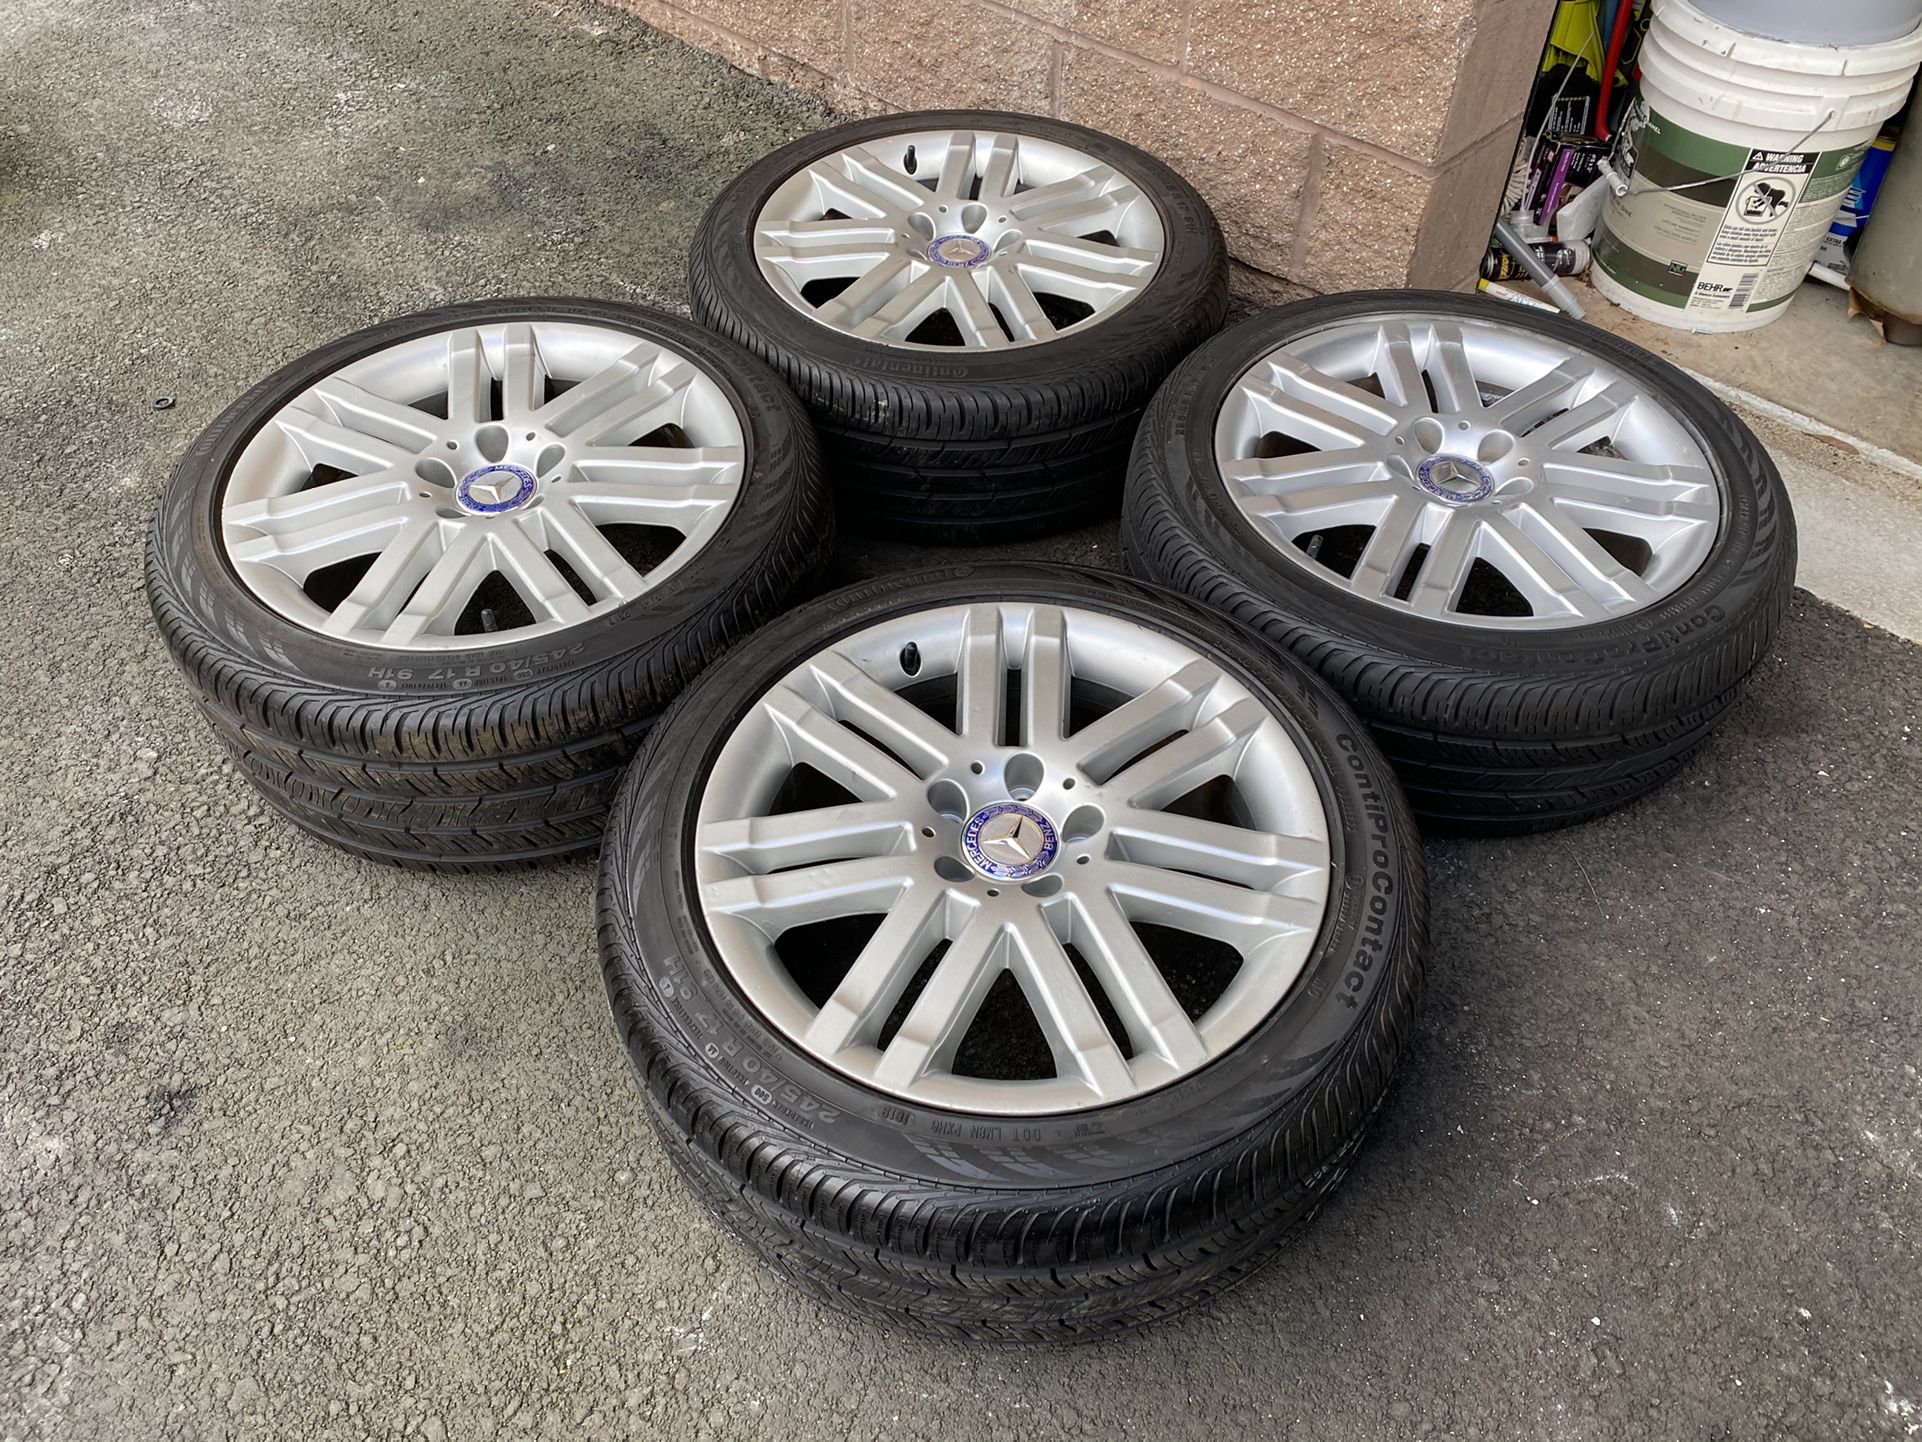 Mercedes Benz Staggered Wheels Size 17